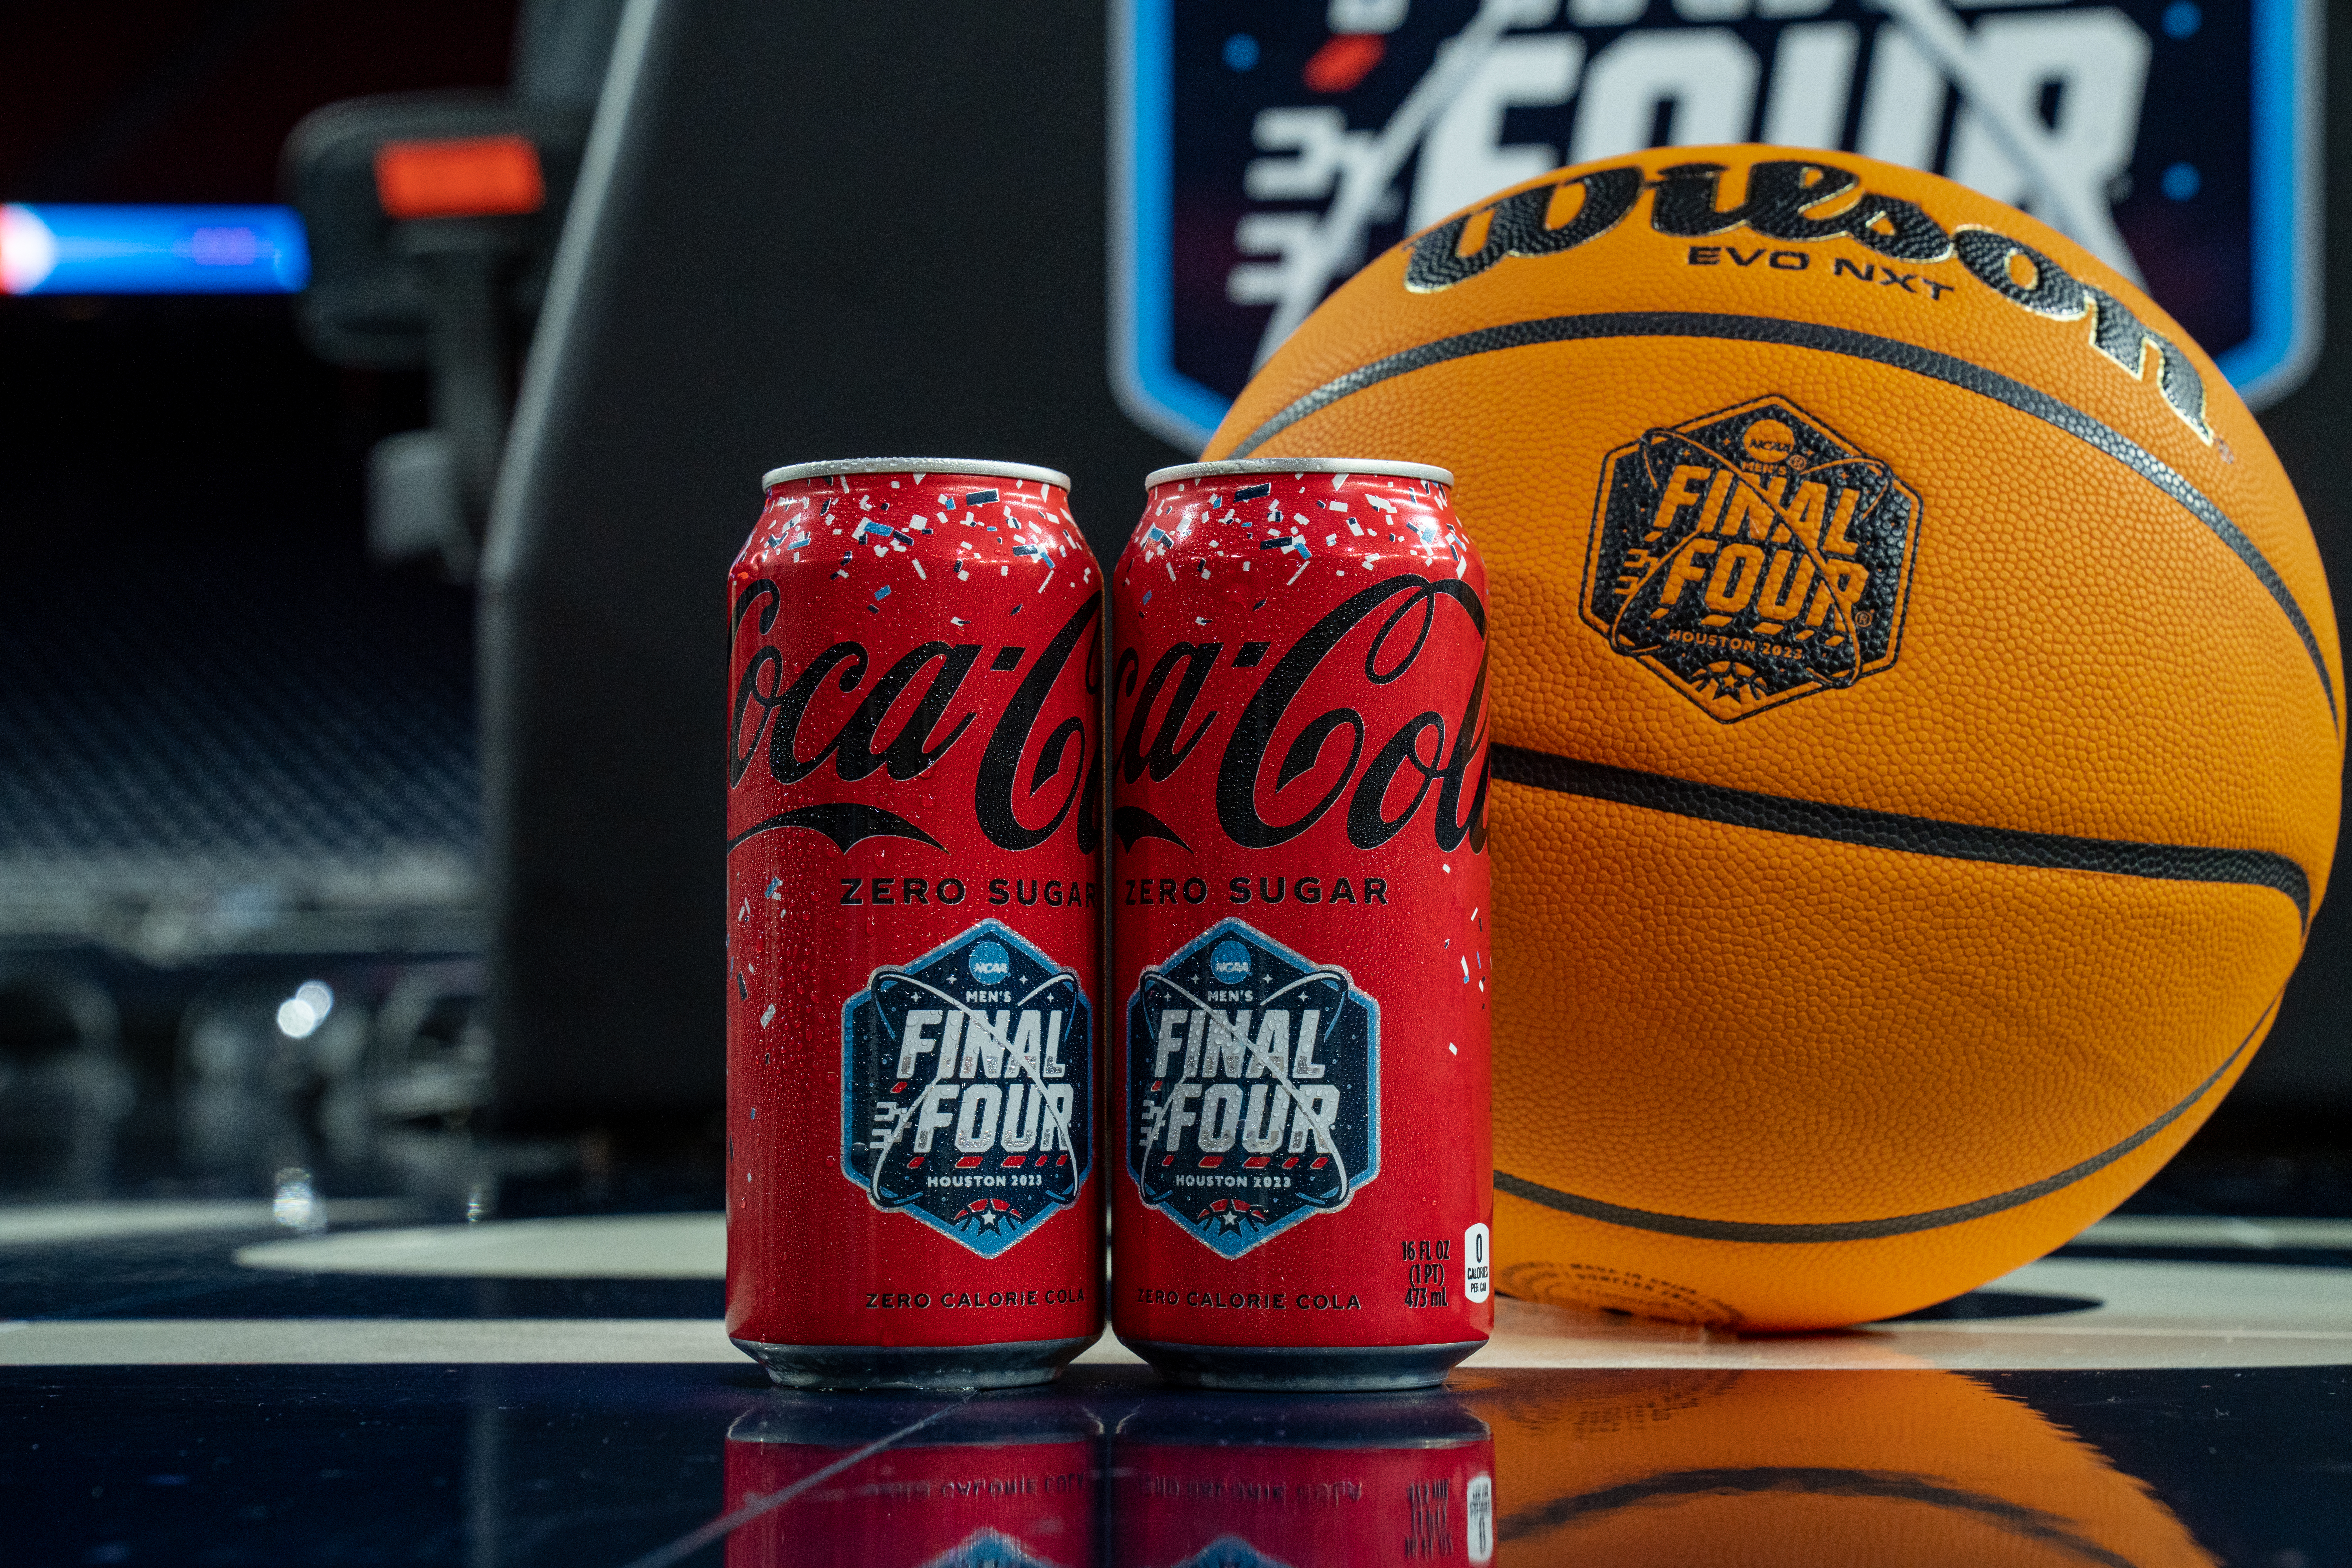 NCAA branded Coca-Cola Zero Sugar cans reflect on the court in front of a Final Four basketball